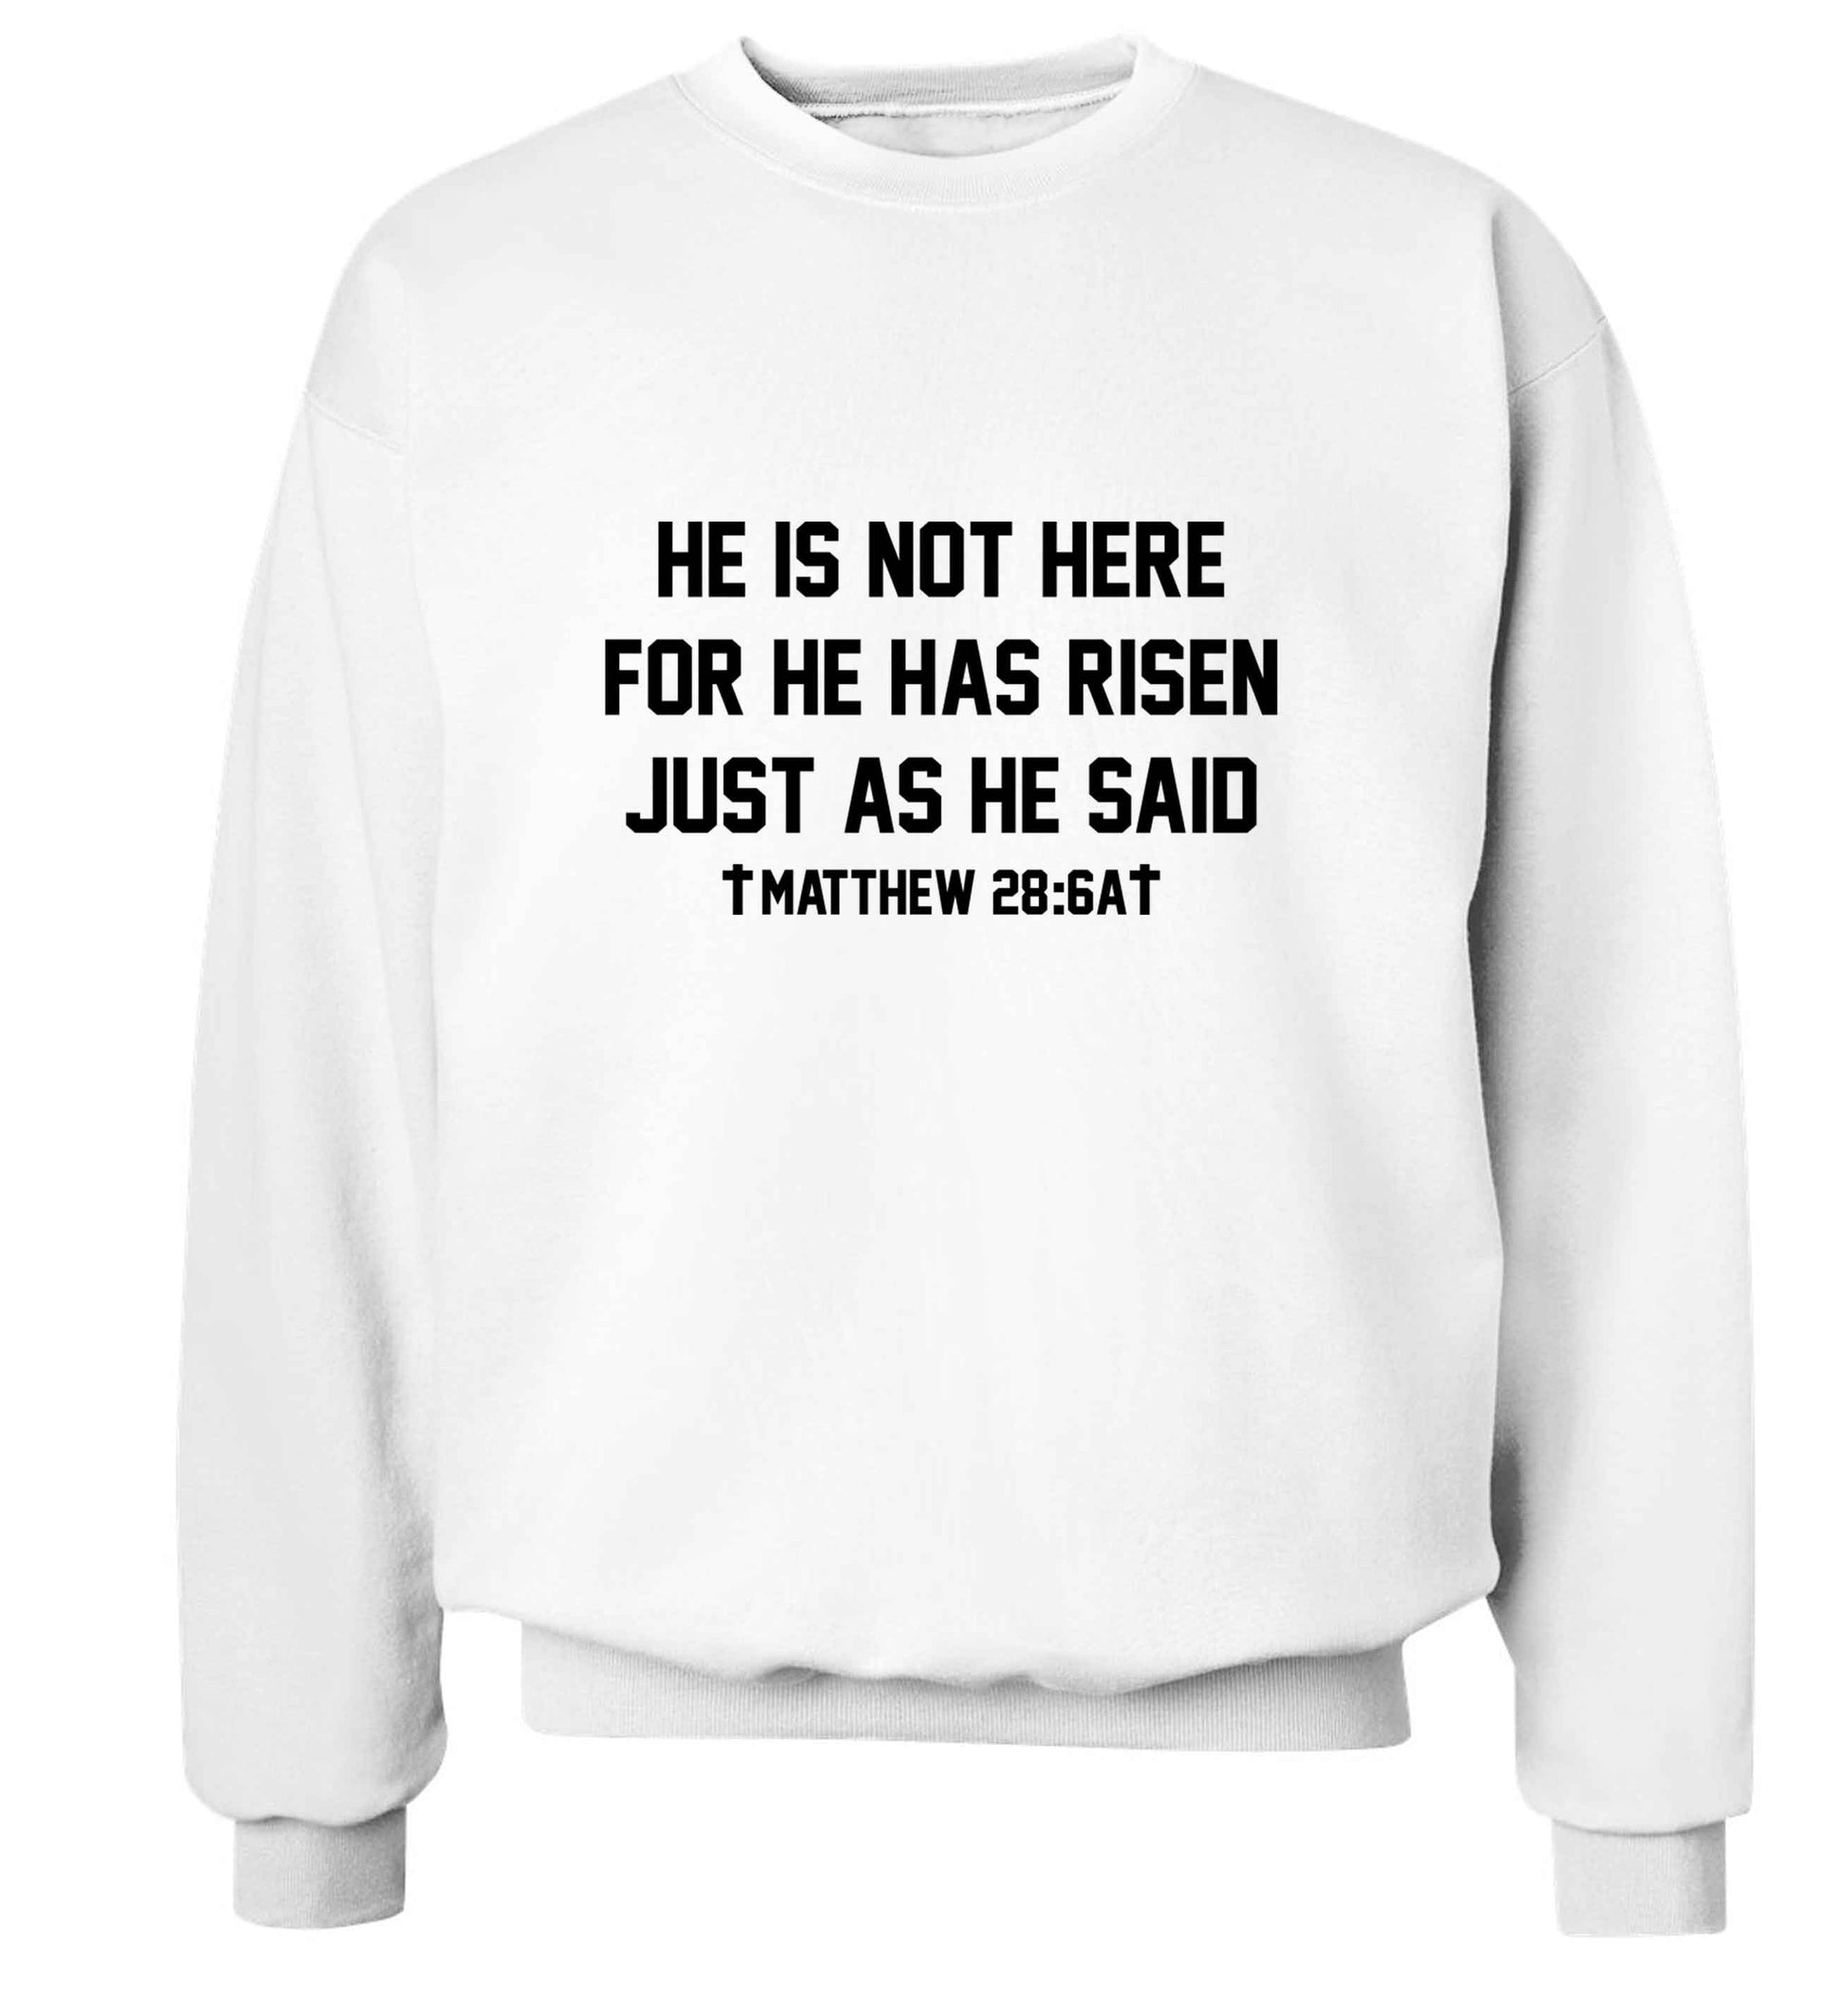 He is not here for he has risen just as he said matthew 28:6A adult's unisex white sweater 2XL